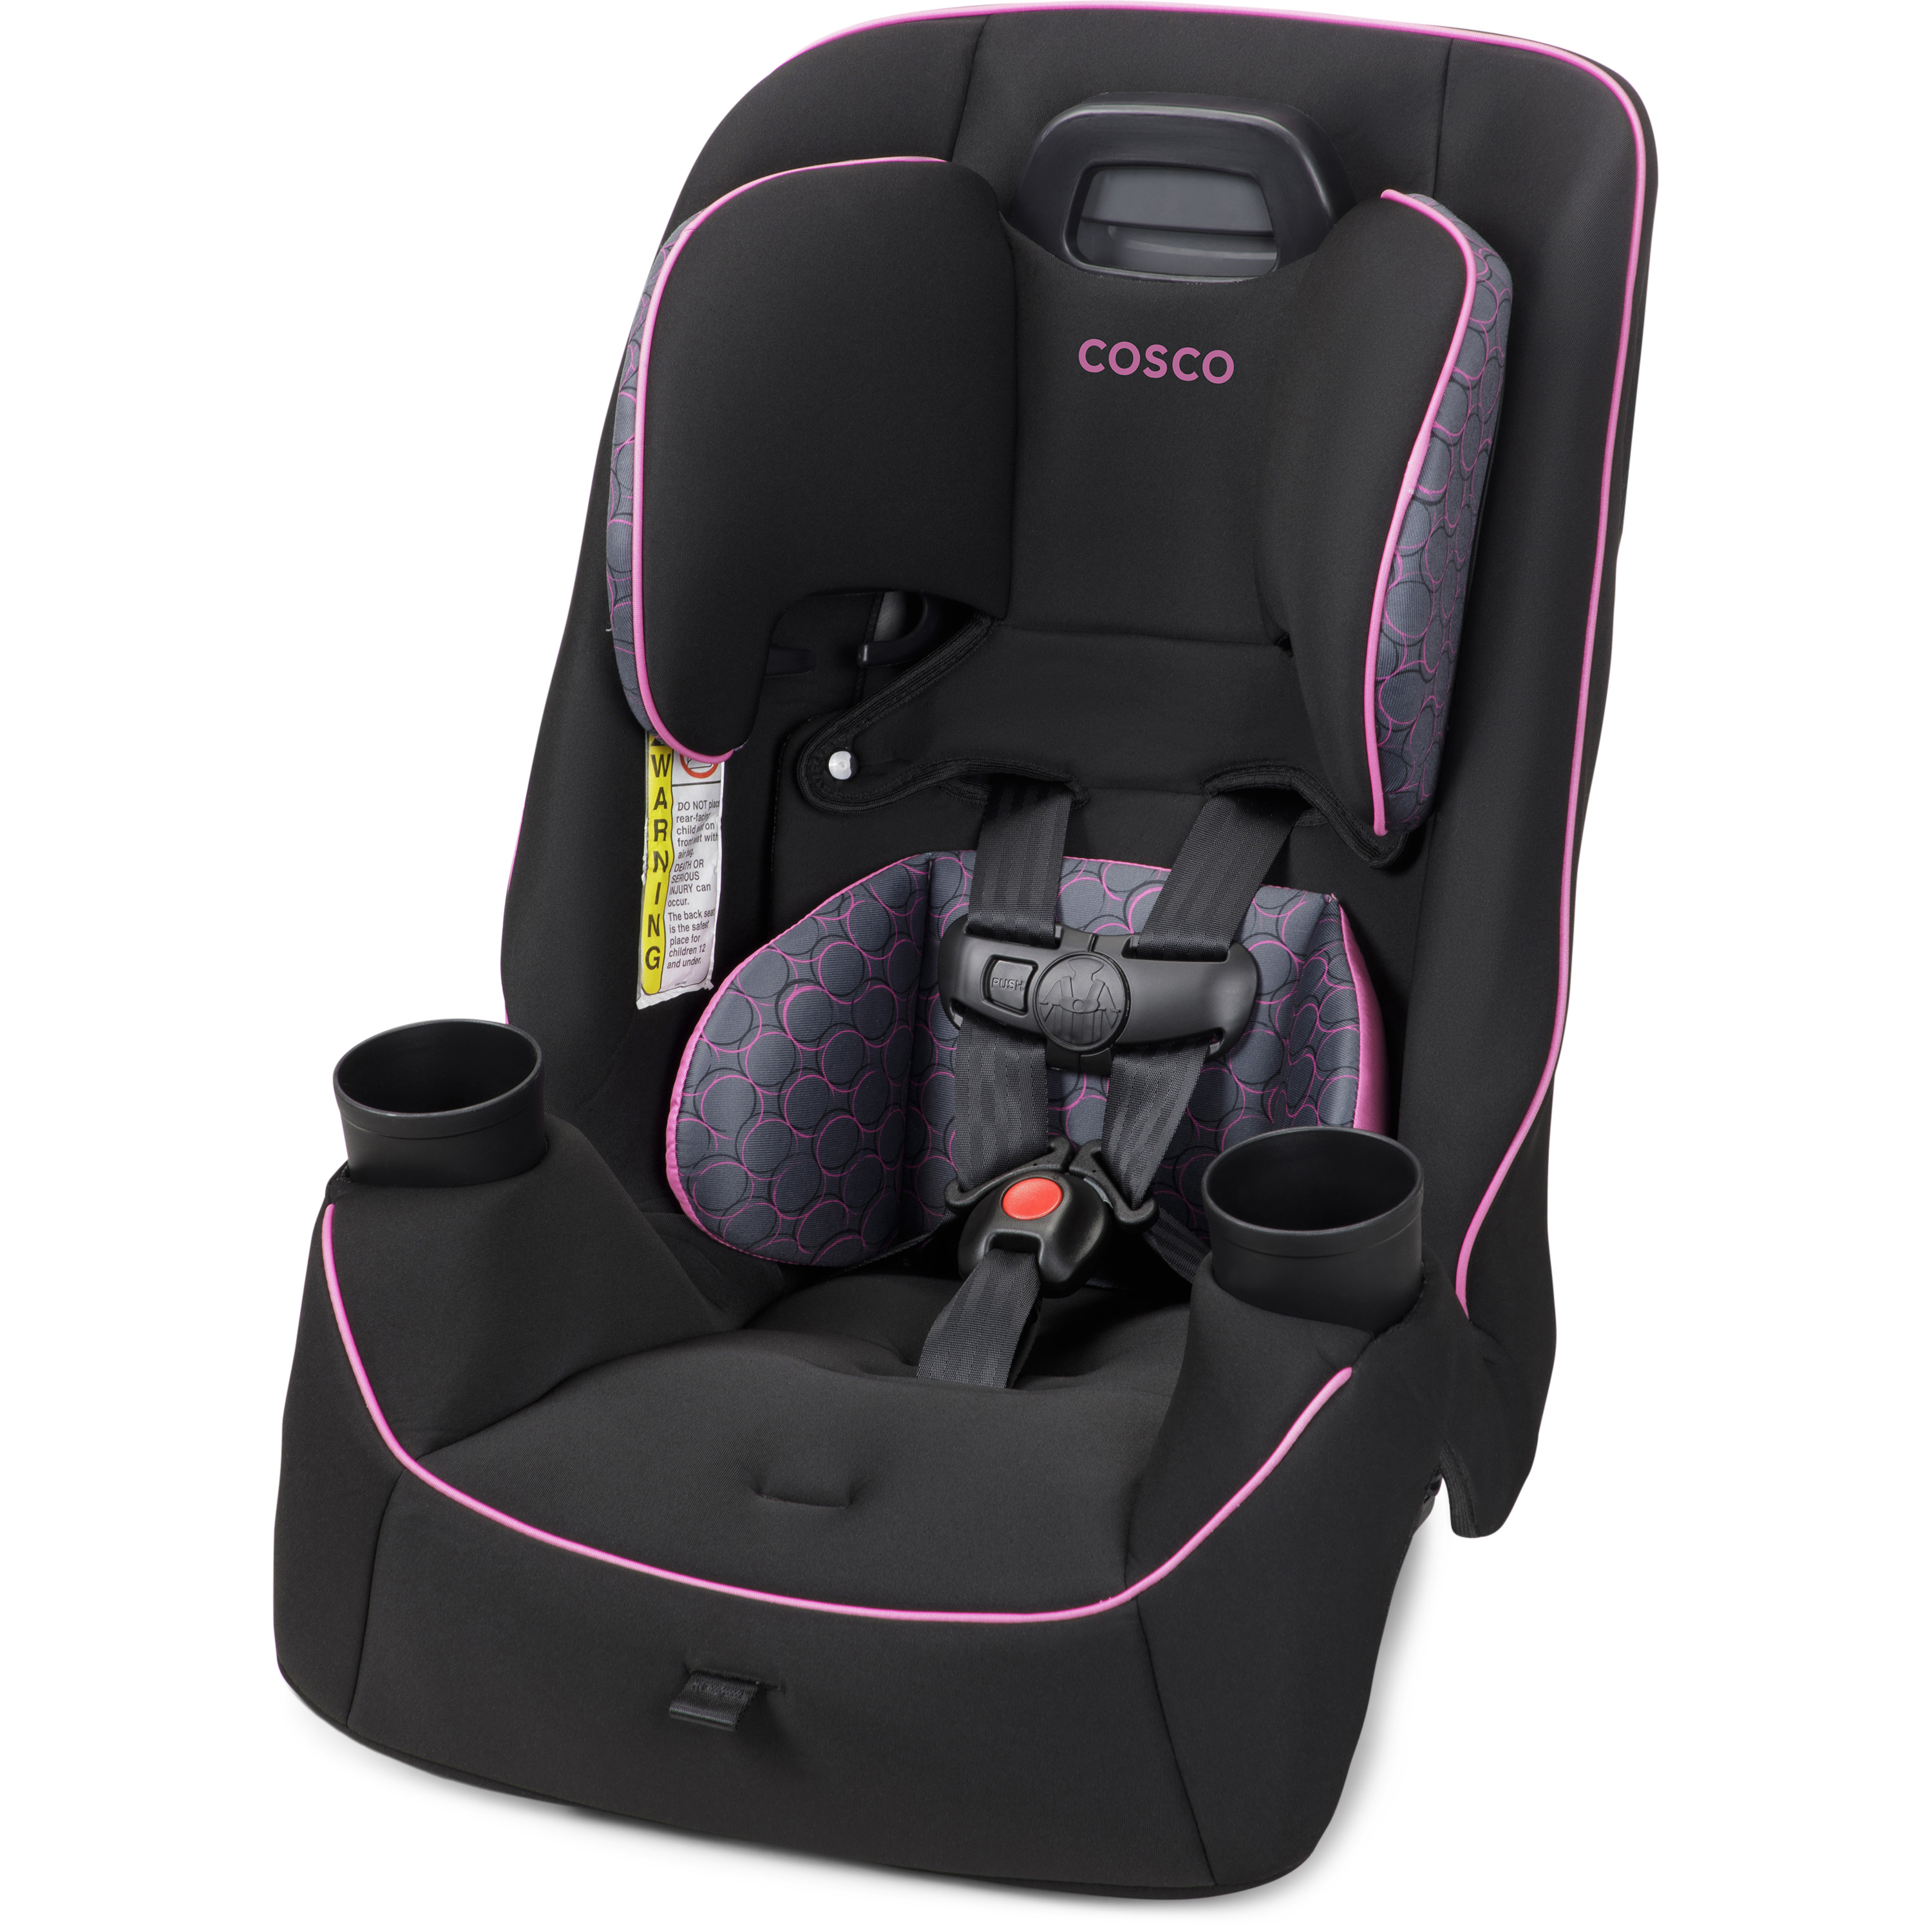 Cosco Kids Easy Elite Slim All-in-One Convertible Car Seat, Pink Rings - image 1 of 28